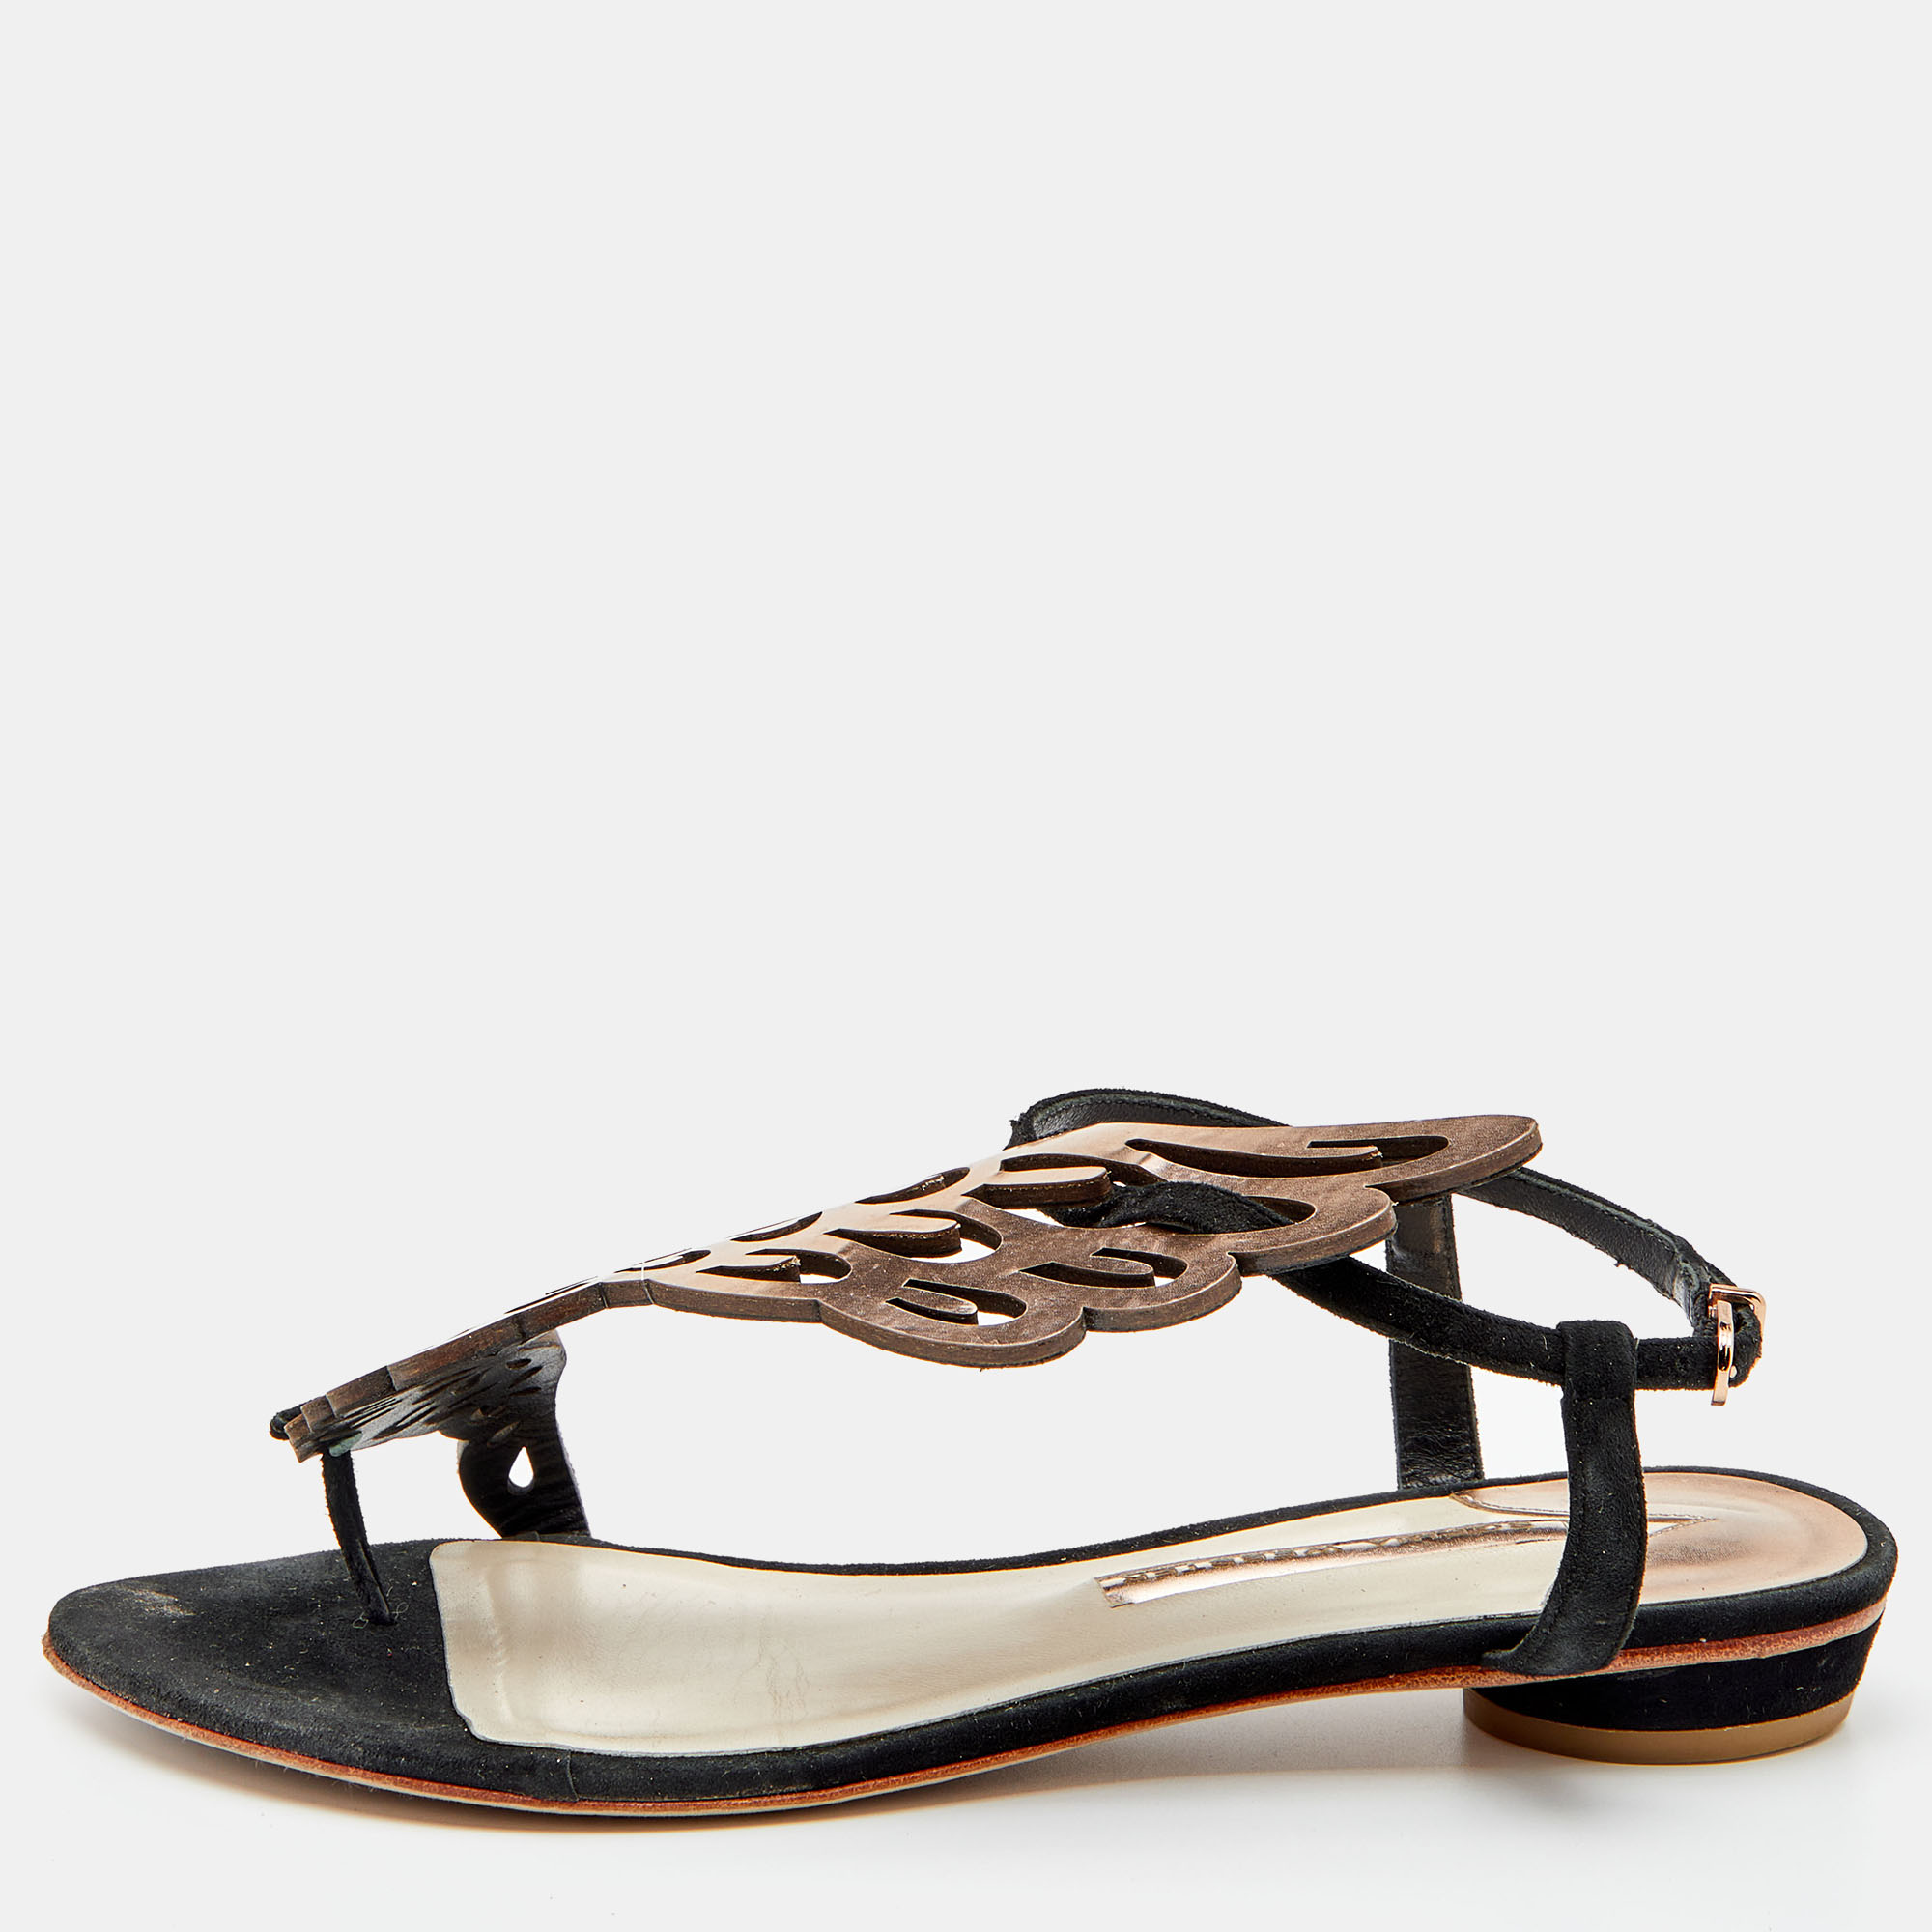 Sophia Webster Metallic Rose Gold/Black Leather And Suede Seraphina Angel Wing Flat Sandals Size 39.5